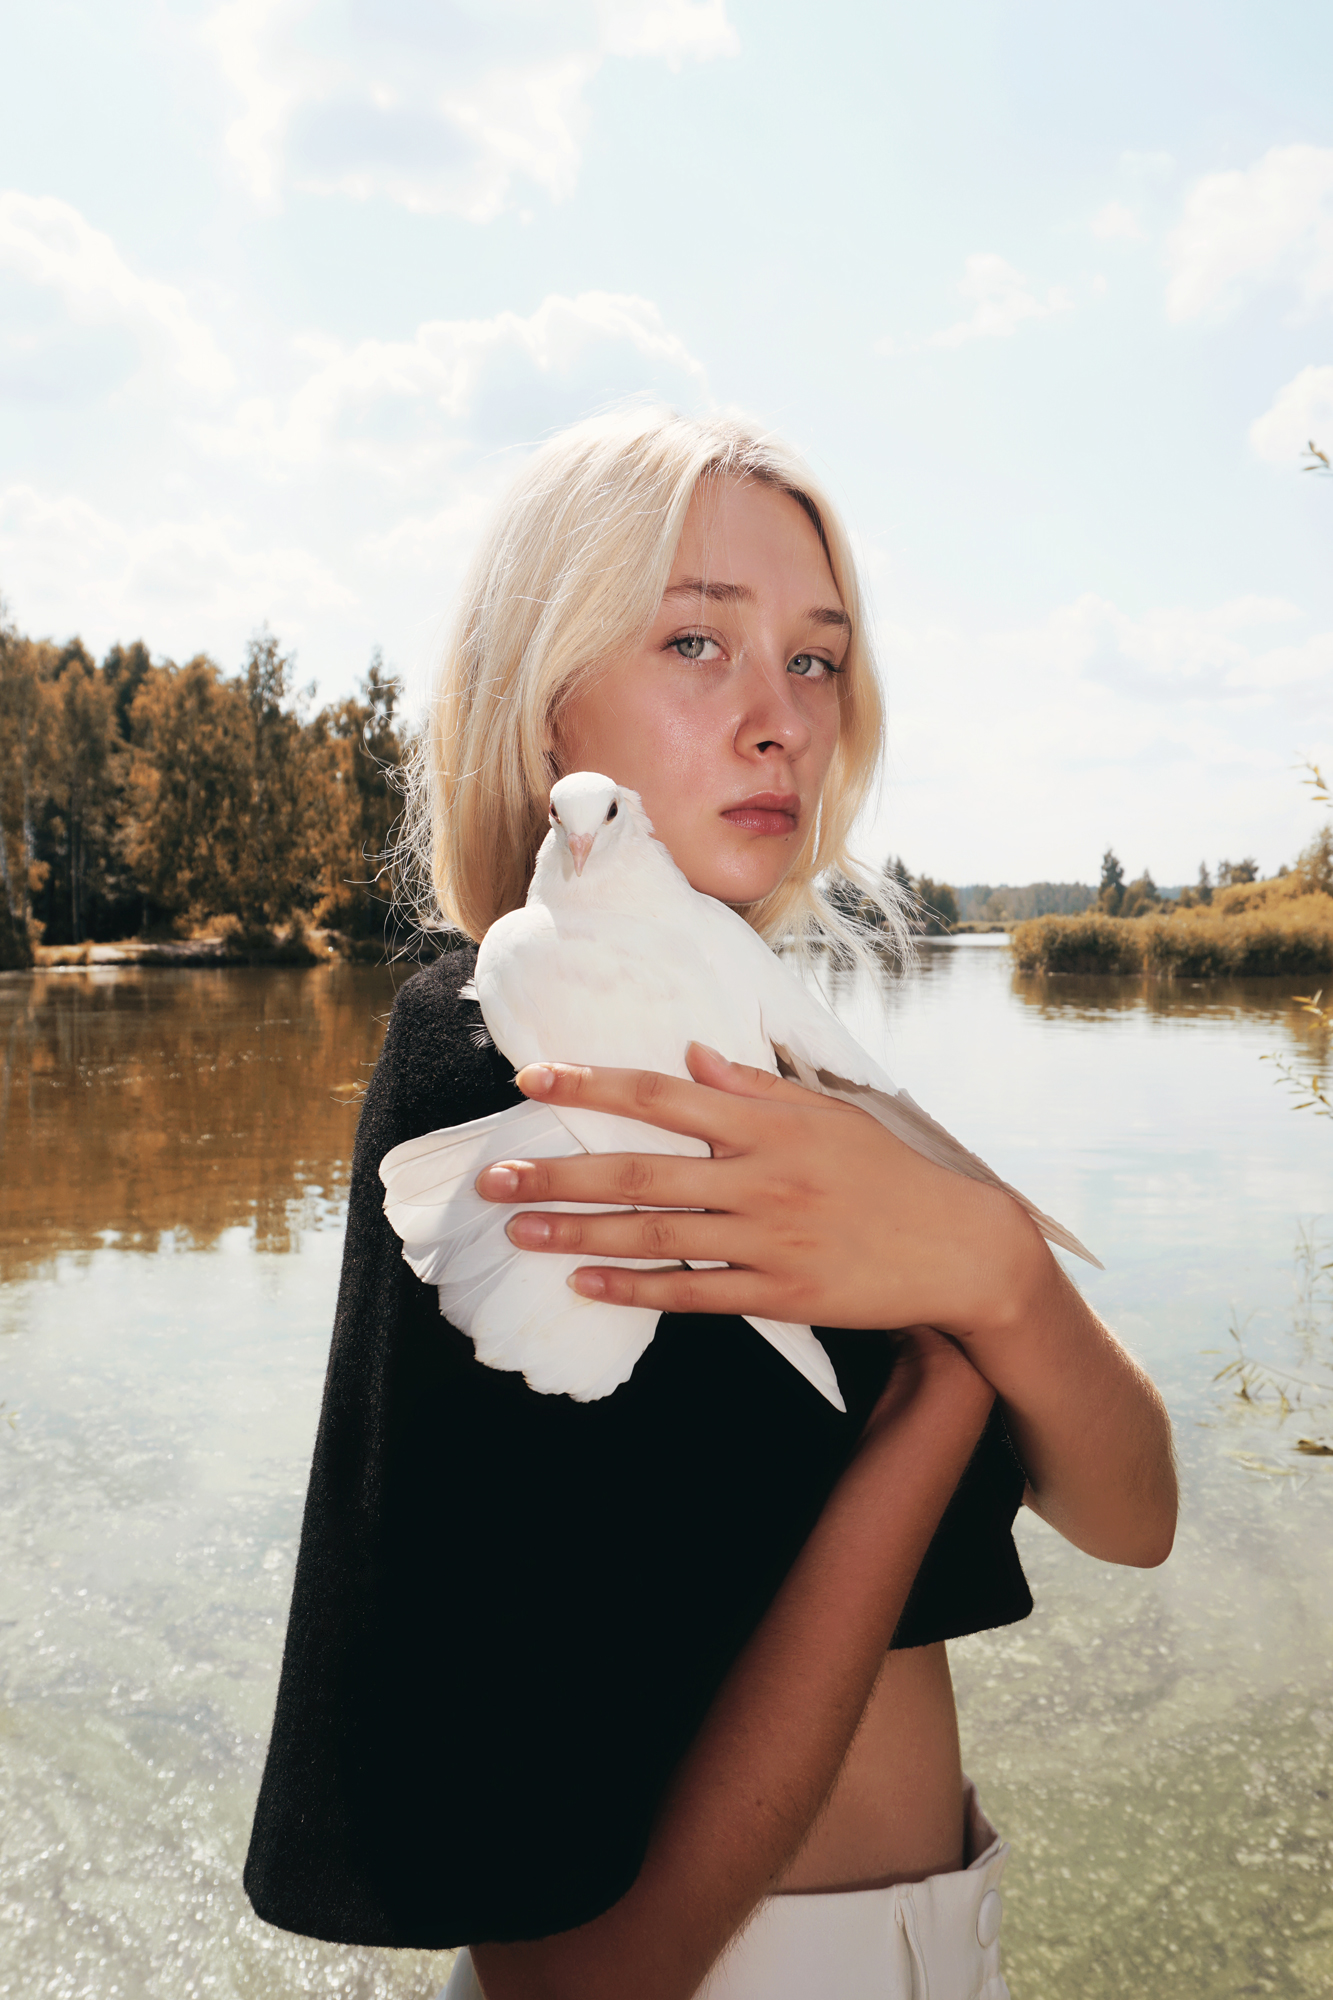 <p>Julia Kaydala took this photo for fashion label OKKINO. “I wanted to create a sense of unity, calm, and acceptance. So the shoot was slightly spontaneous: I headed to the countryside with my friends and we roamed around looking for interesting locations. White doves reflect this spirit and symbolise freedom,” the photographer says. </p>